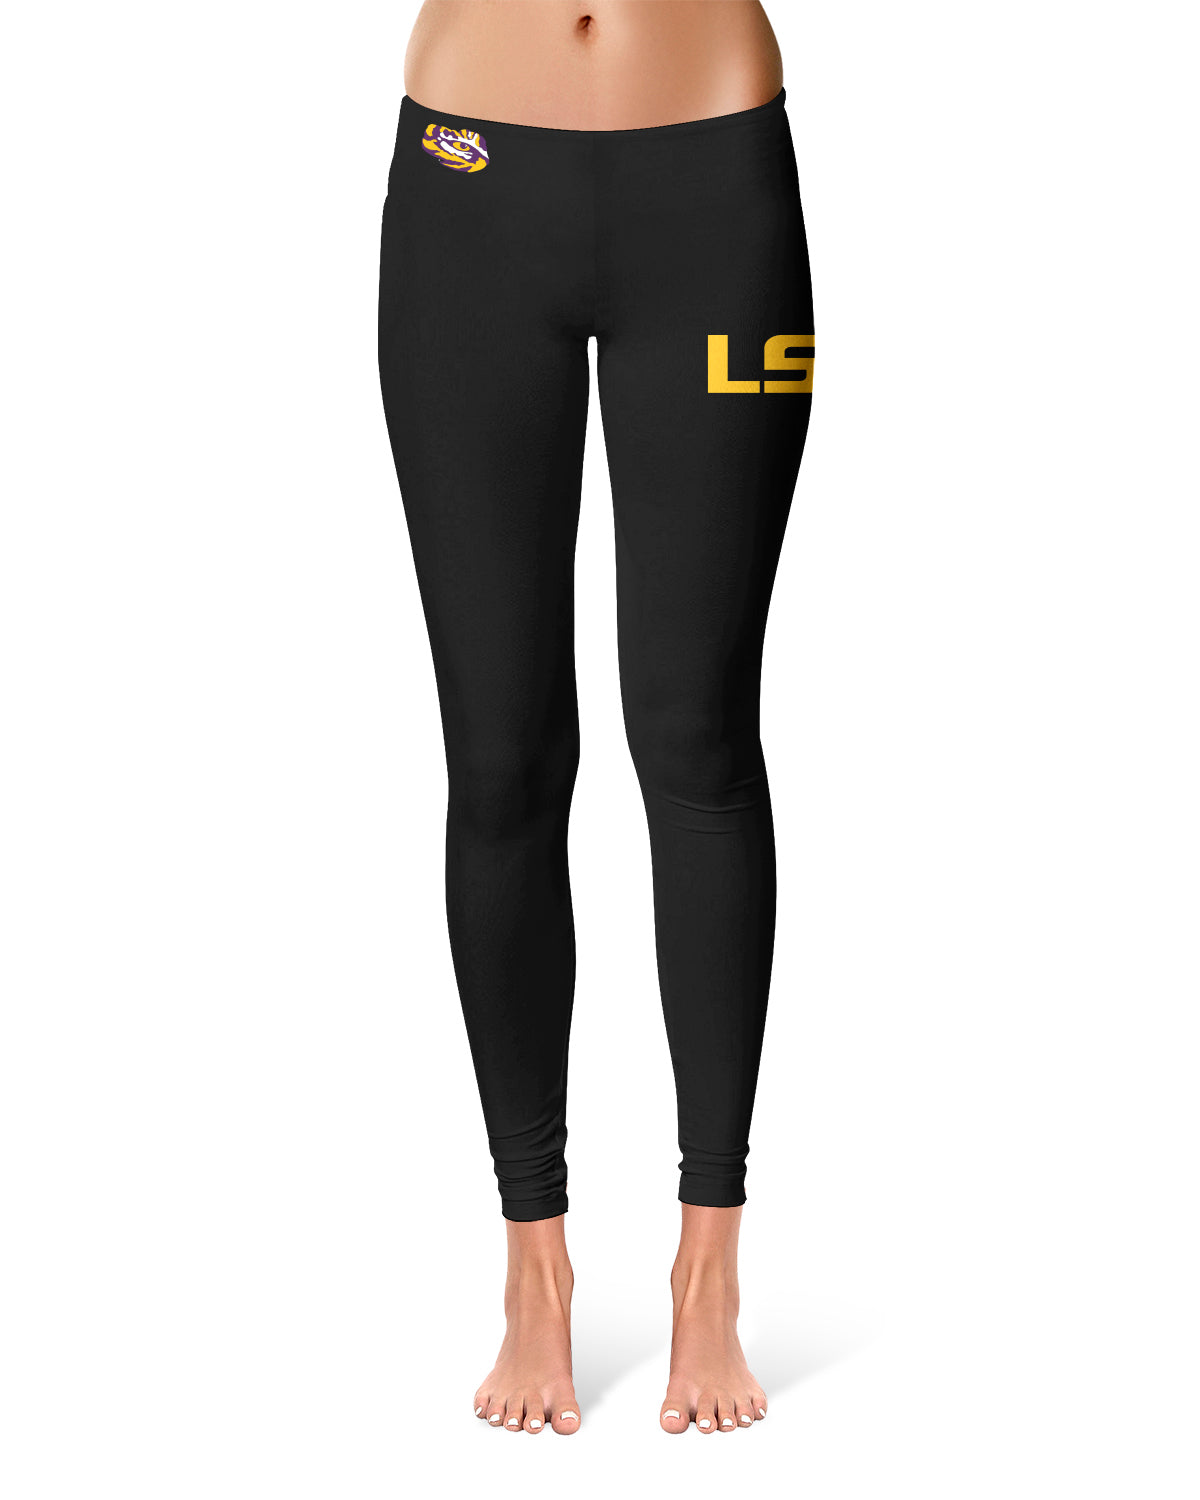 LSU Tigers Game Day Large Logo on Thigh Black Yoga Leggings for Women 2.5  Waist Tights